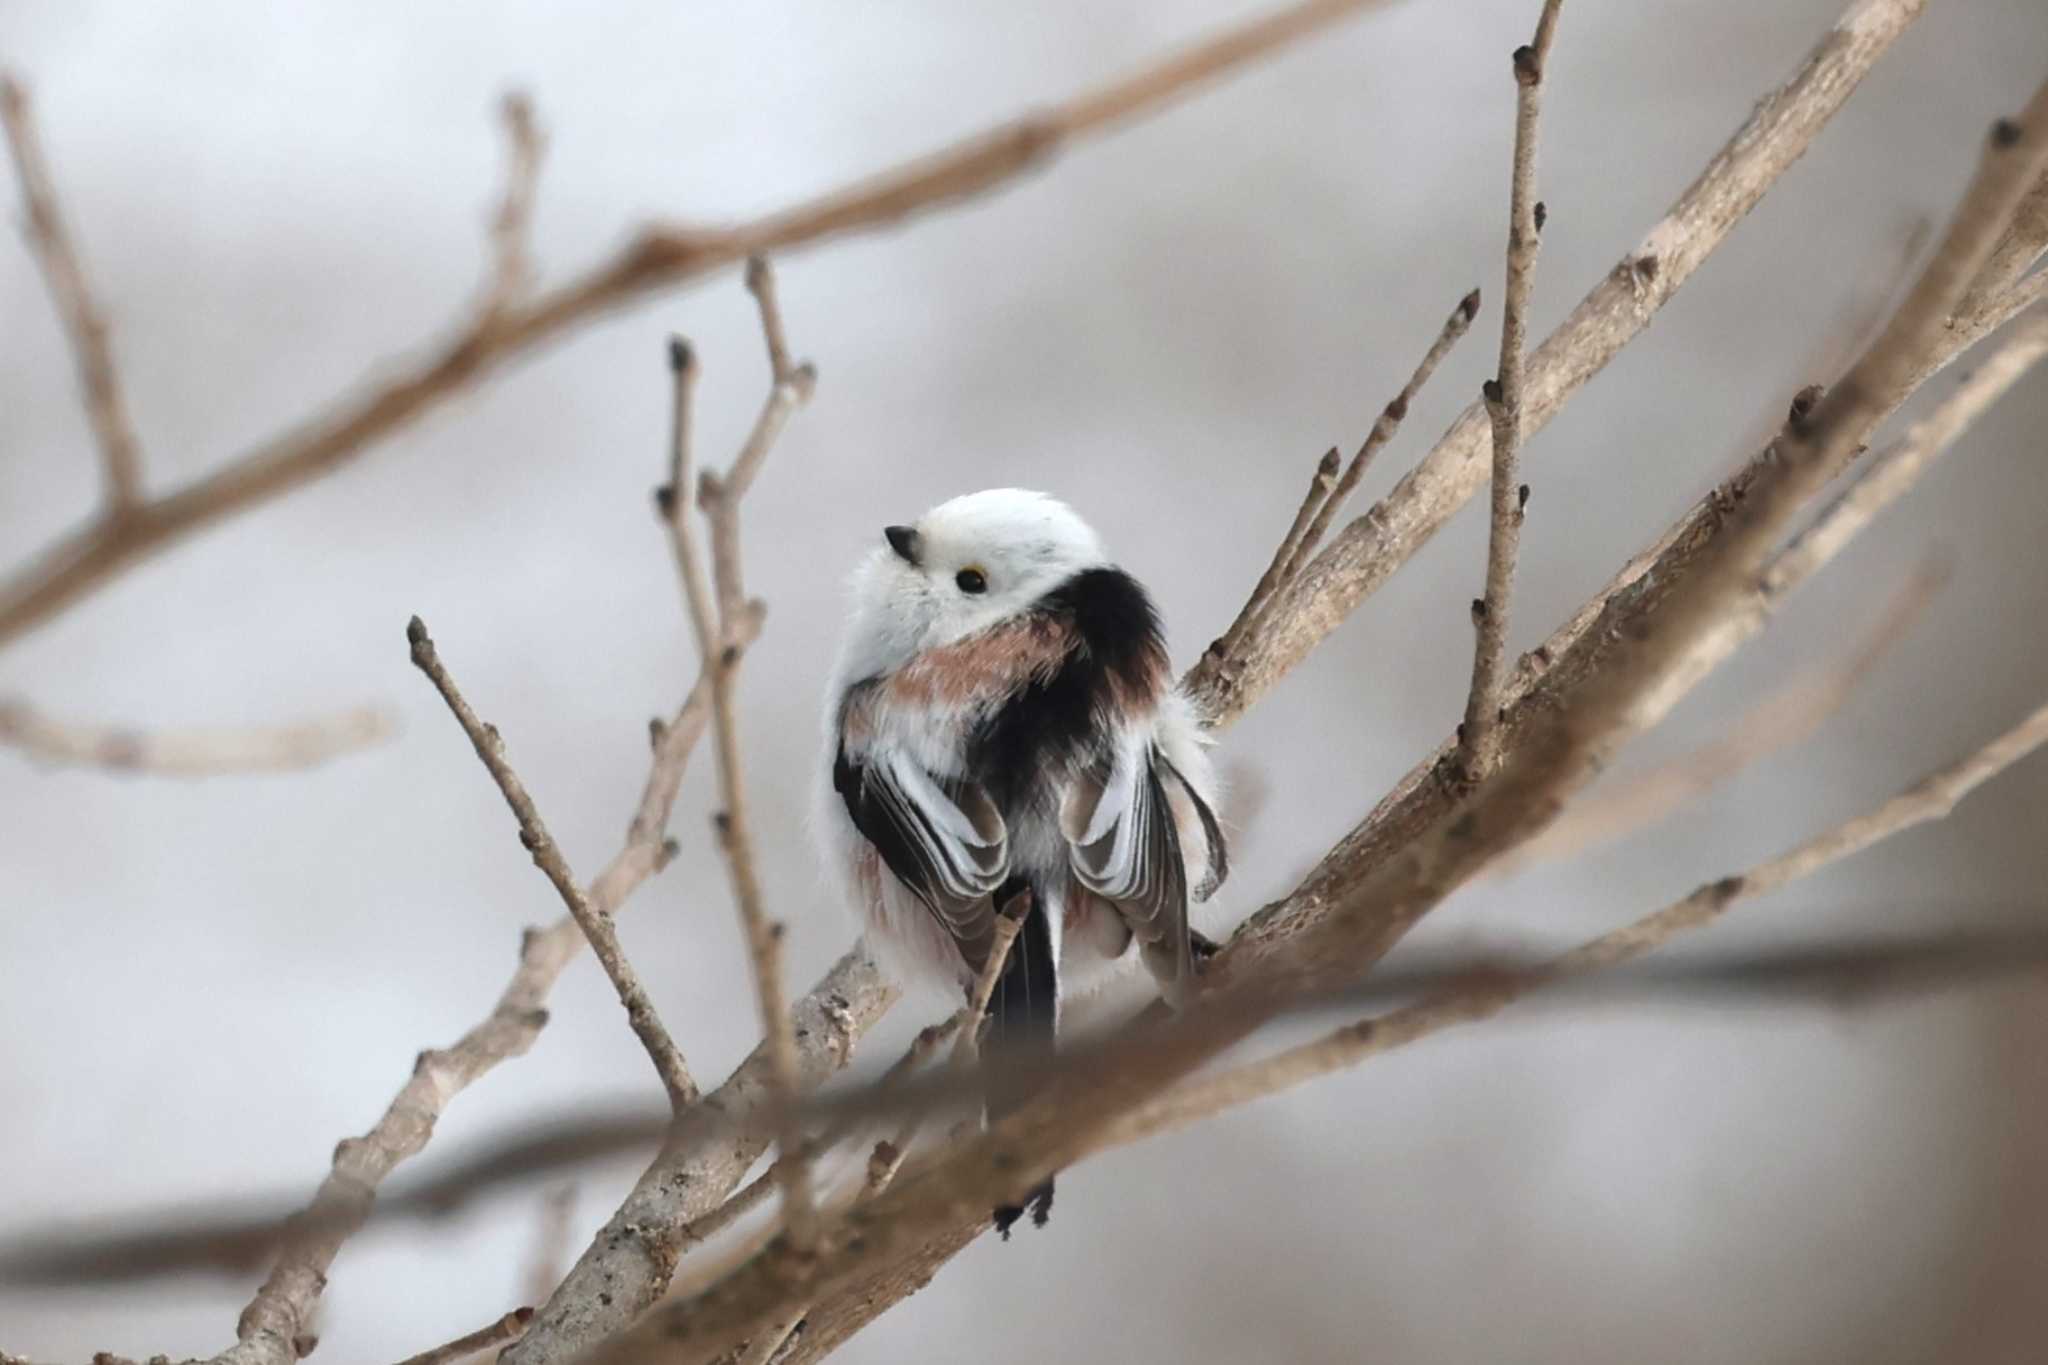 Photo of Long-tailed tit(japonicus) at 鶴居村 by ぼぼぼ